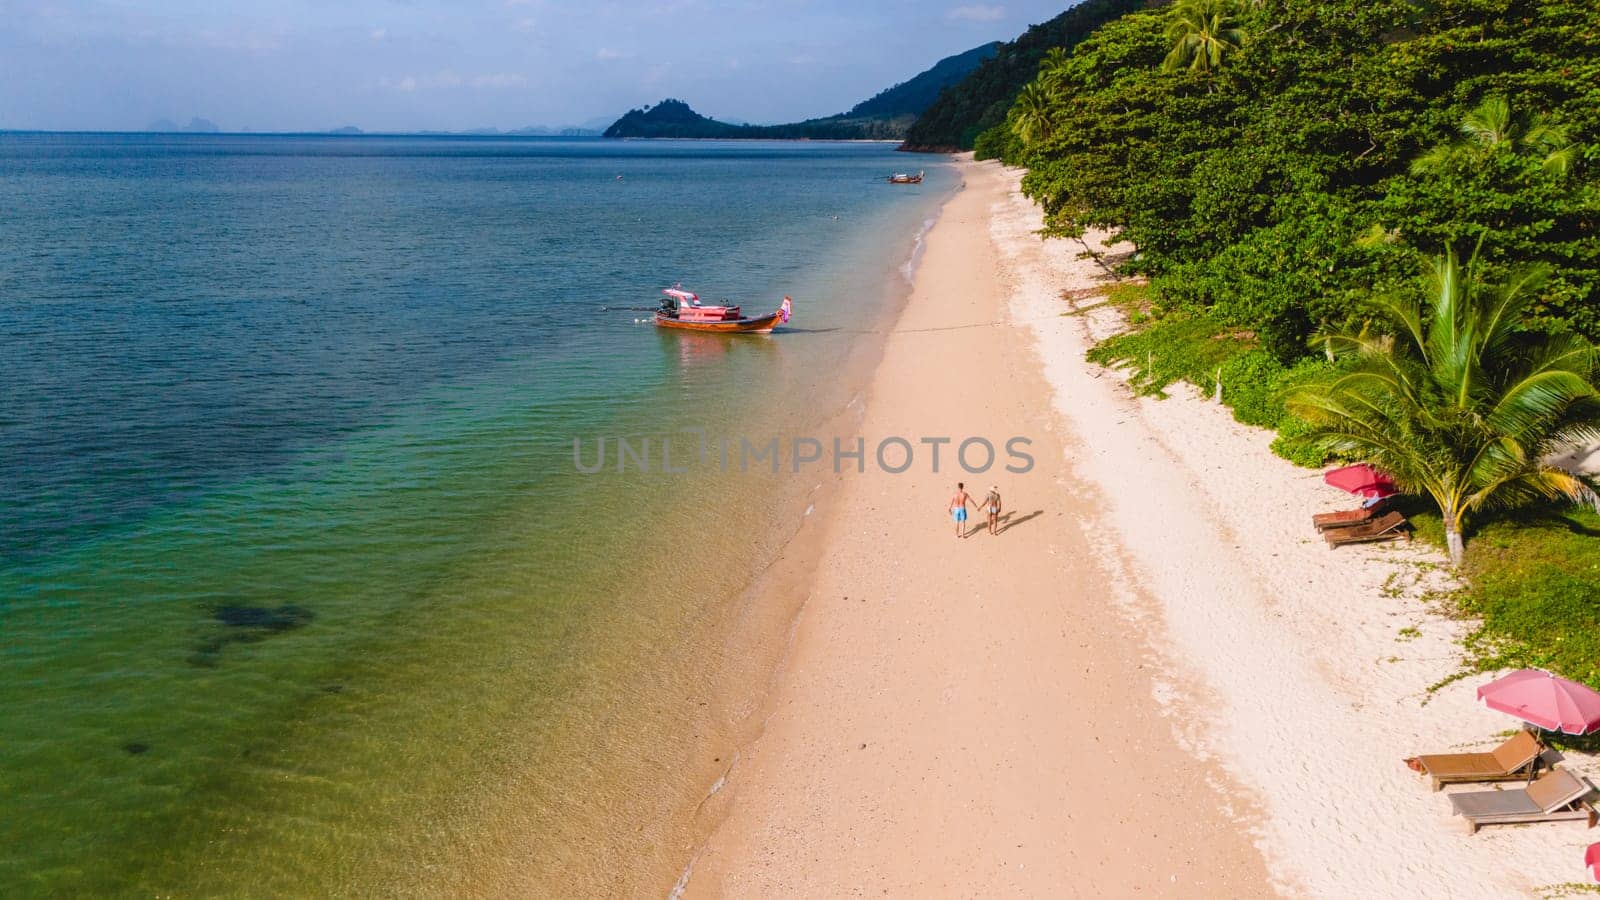 Beach with crystal clear water and blue sky at Koh Libong, Trang province, Thailand, Andaman Sea. by fokkebok